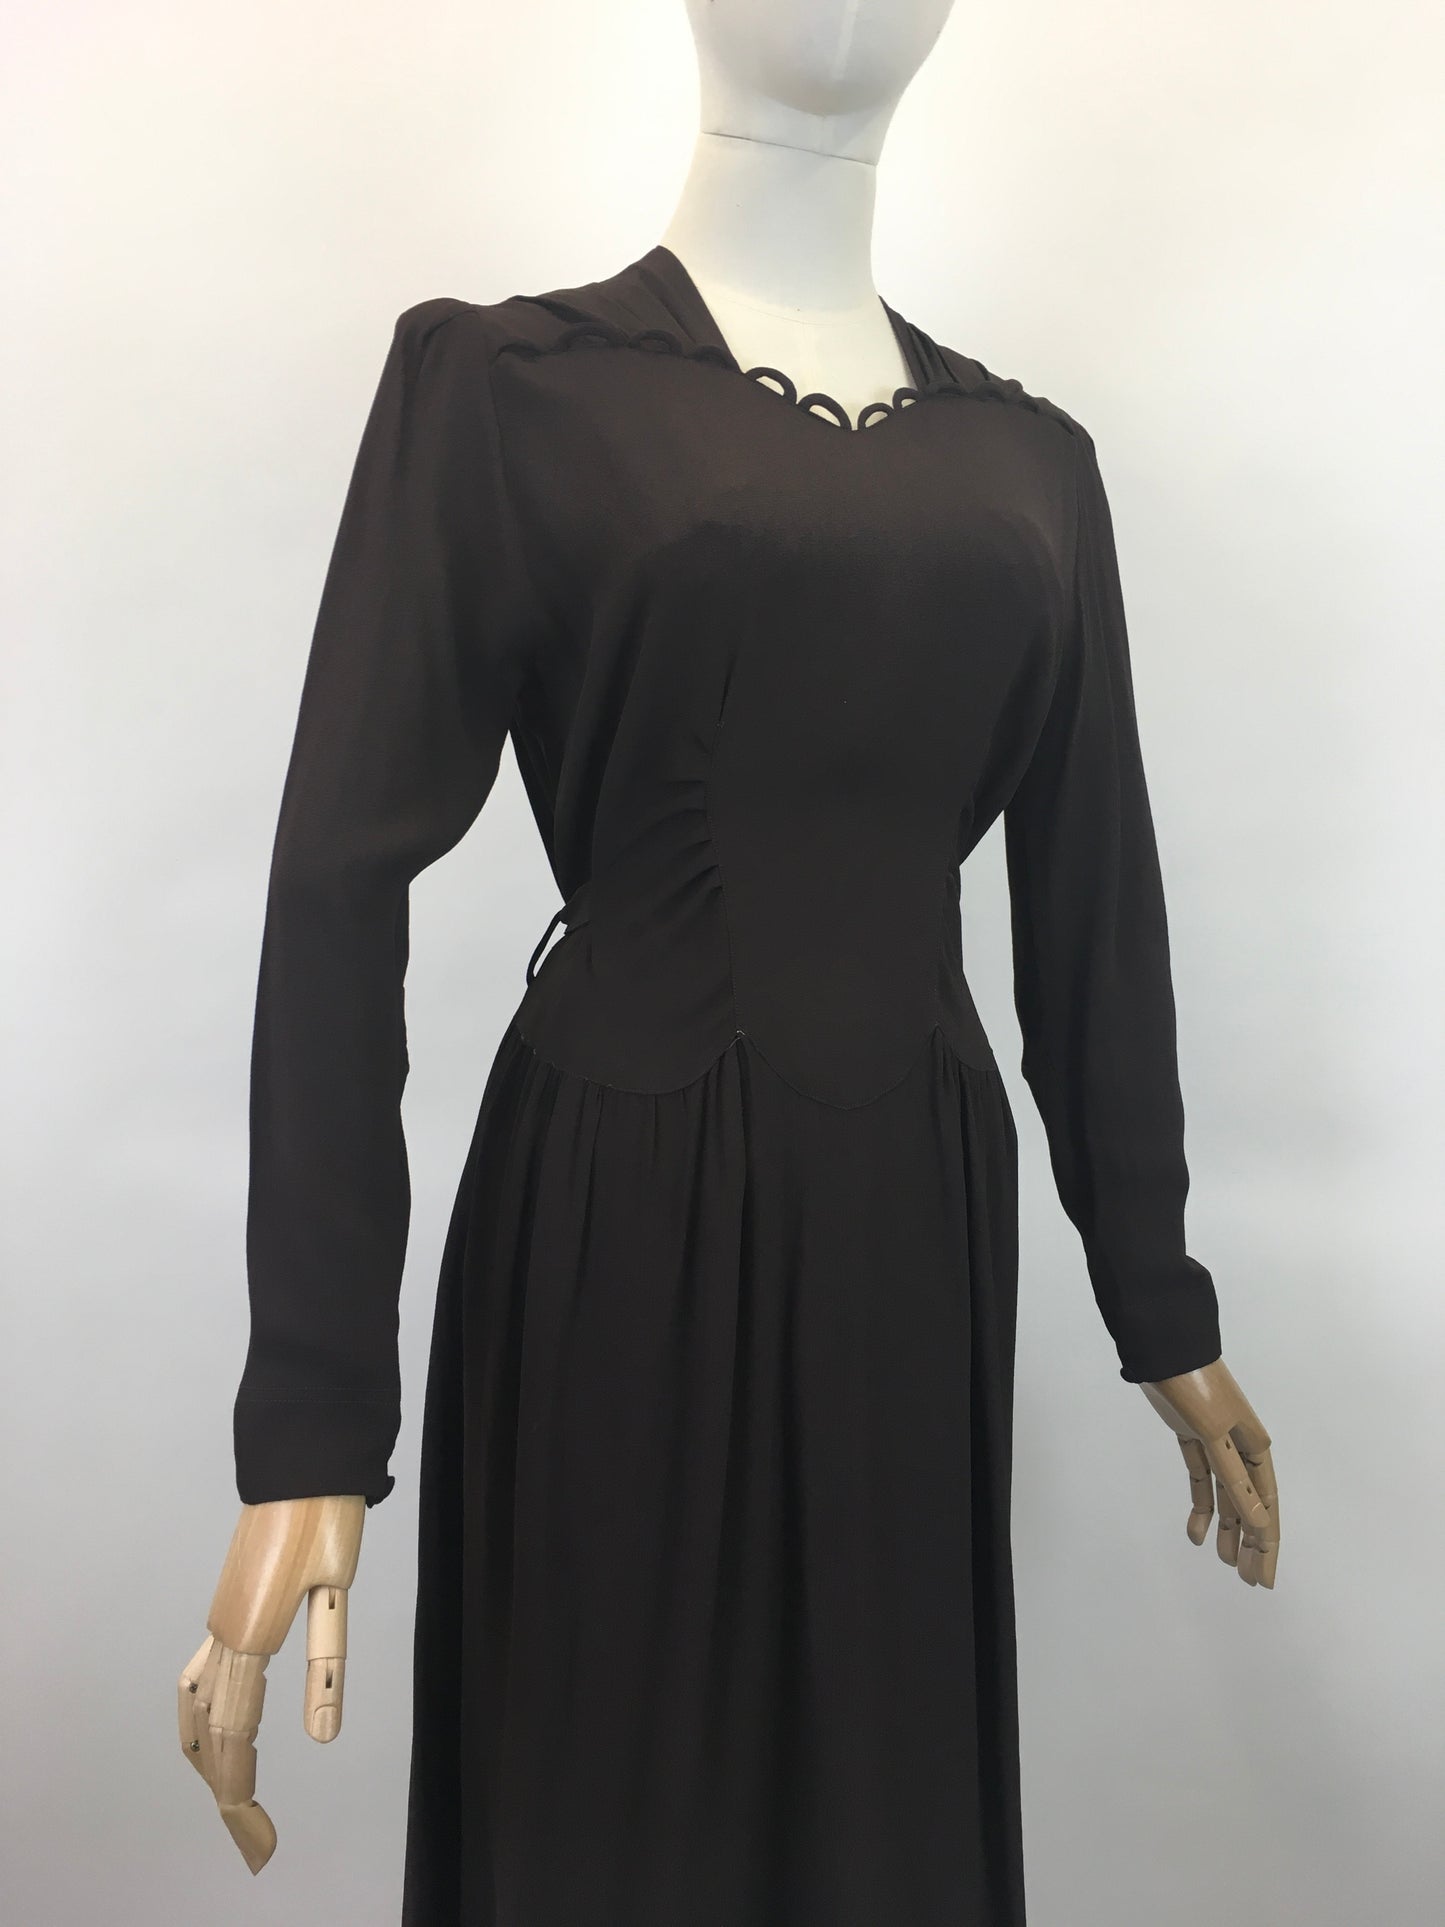 Original 1940's Sublime ' Mary Browne' CC41 Crepe Dress - In A Warming Brown with Roulette Loop Detailing